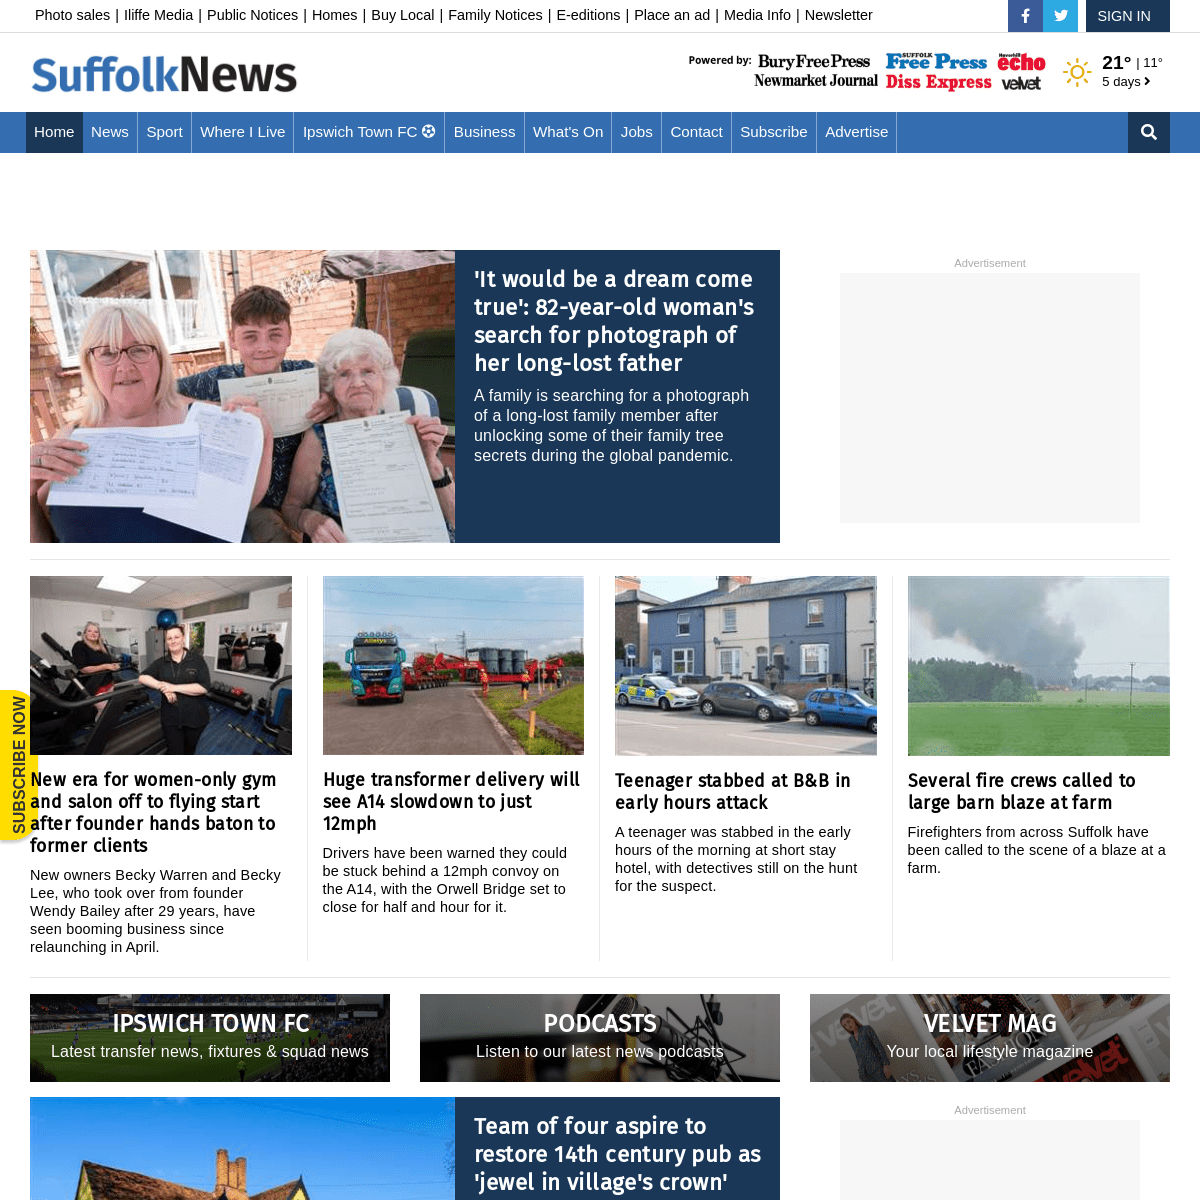 A complete backup of https://suffolknews.co.uk